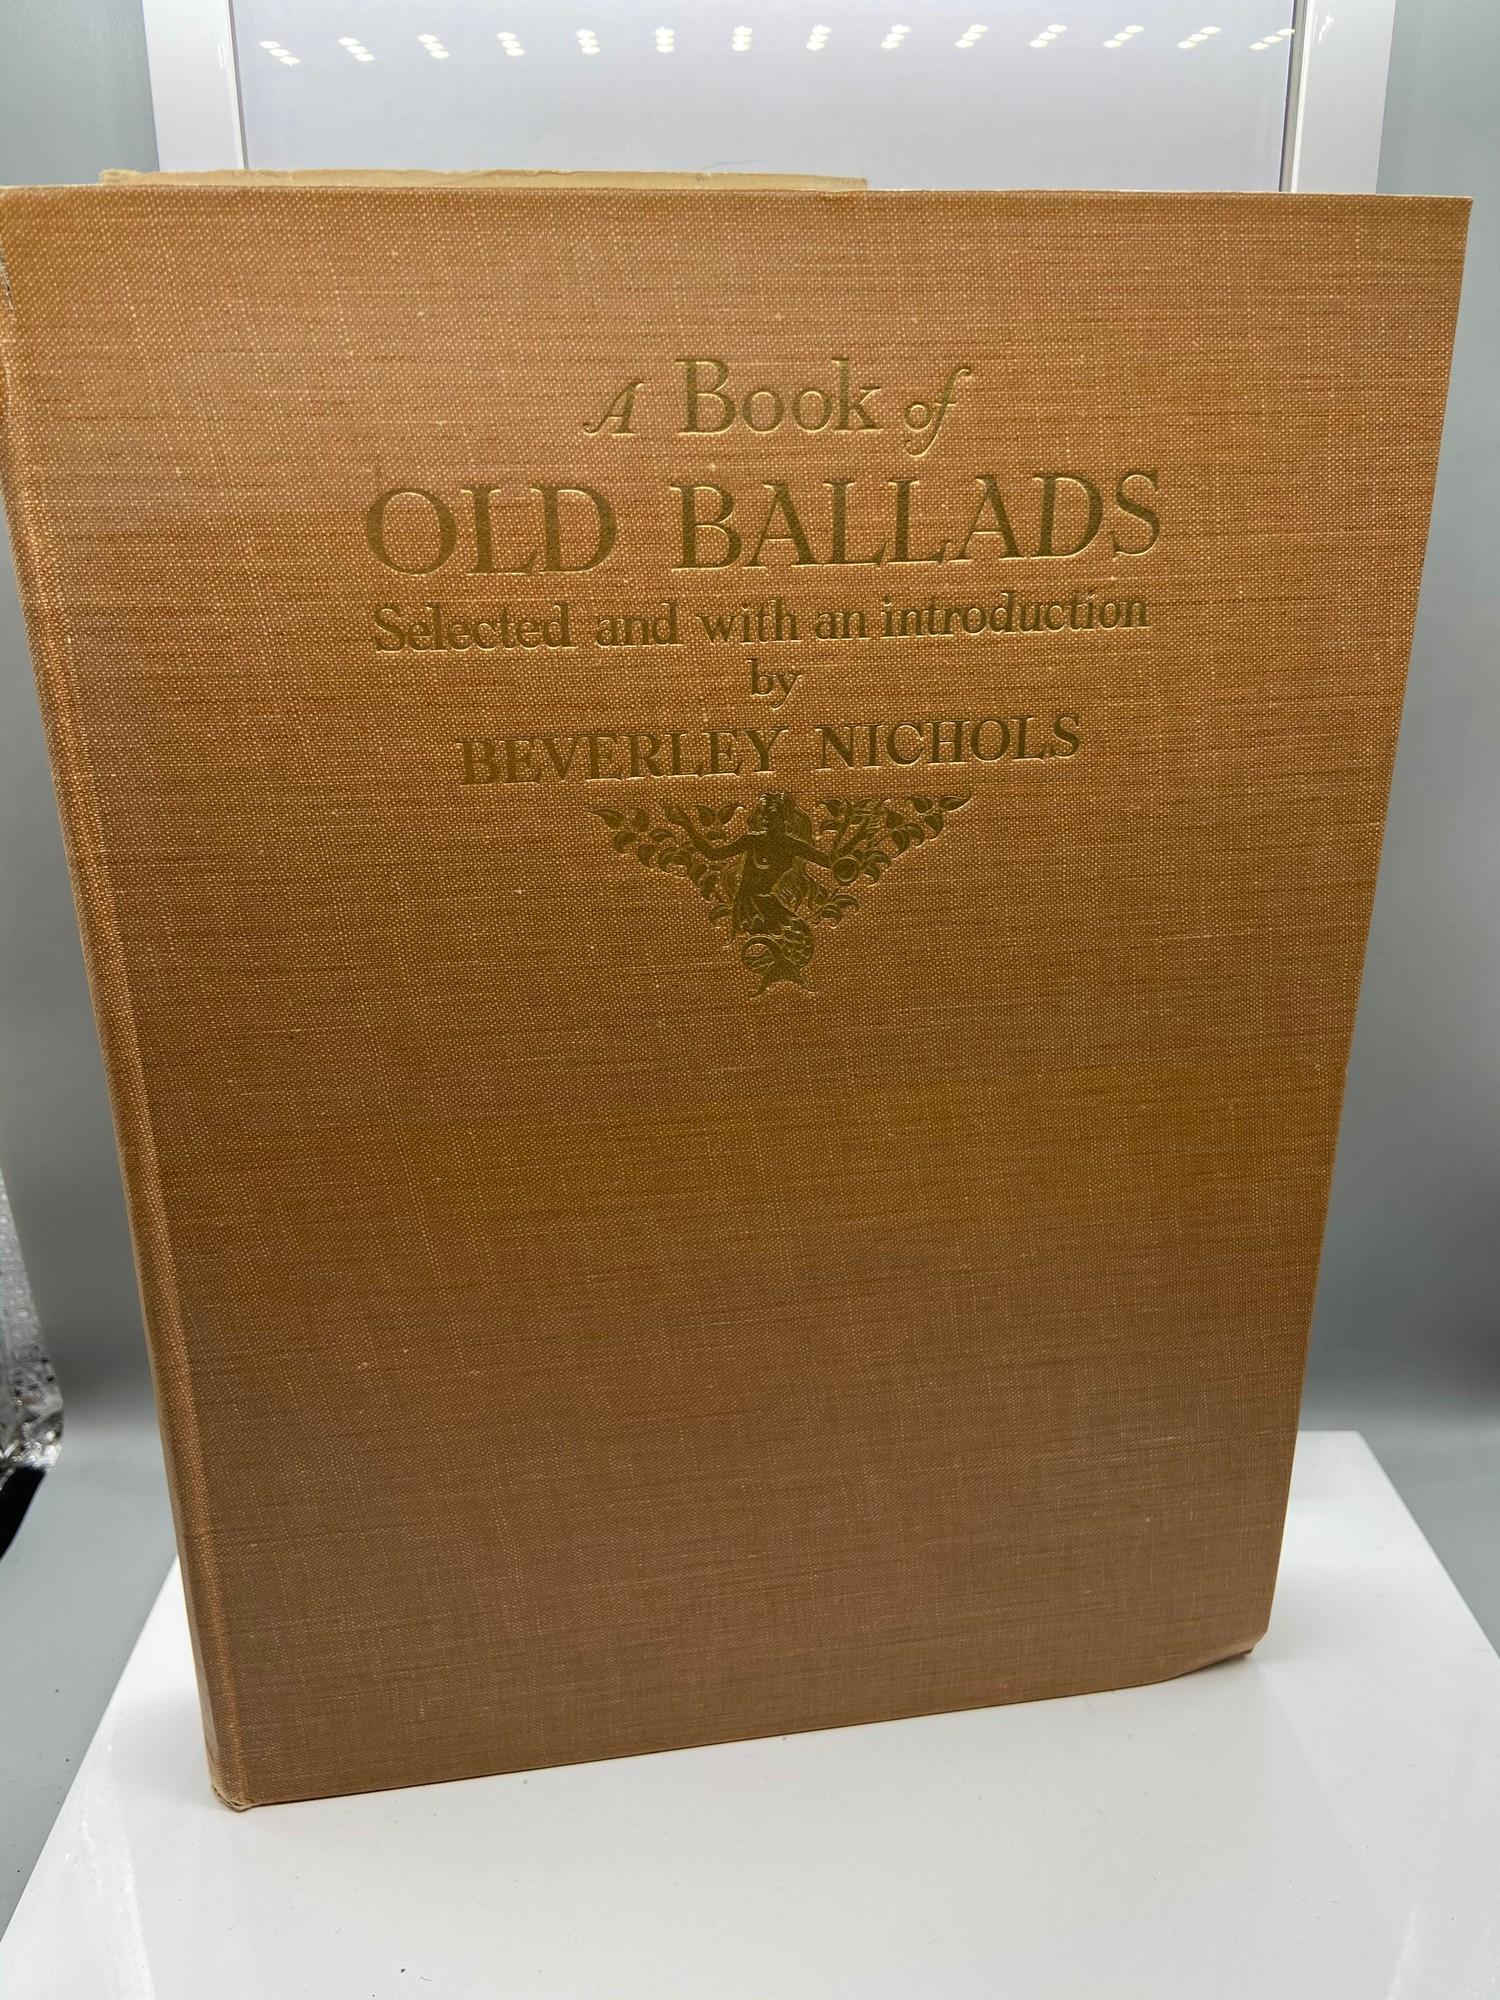 A 1st Edition book of old ballads selected and with an introduction by Beverley Nichols.